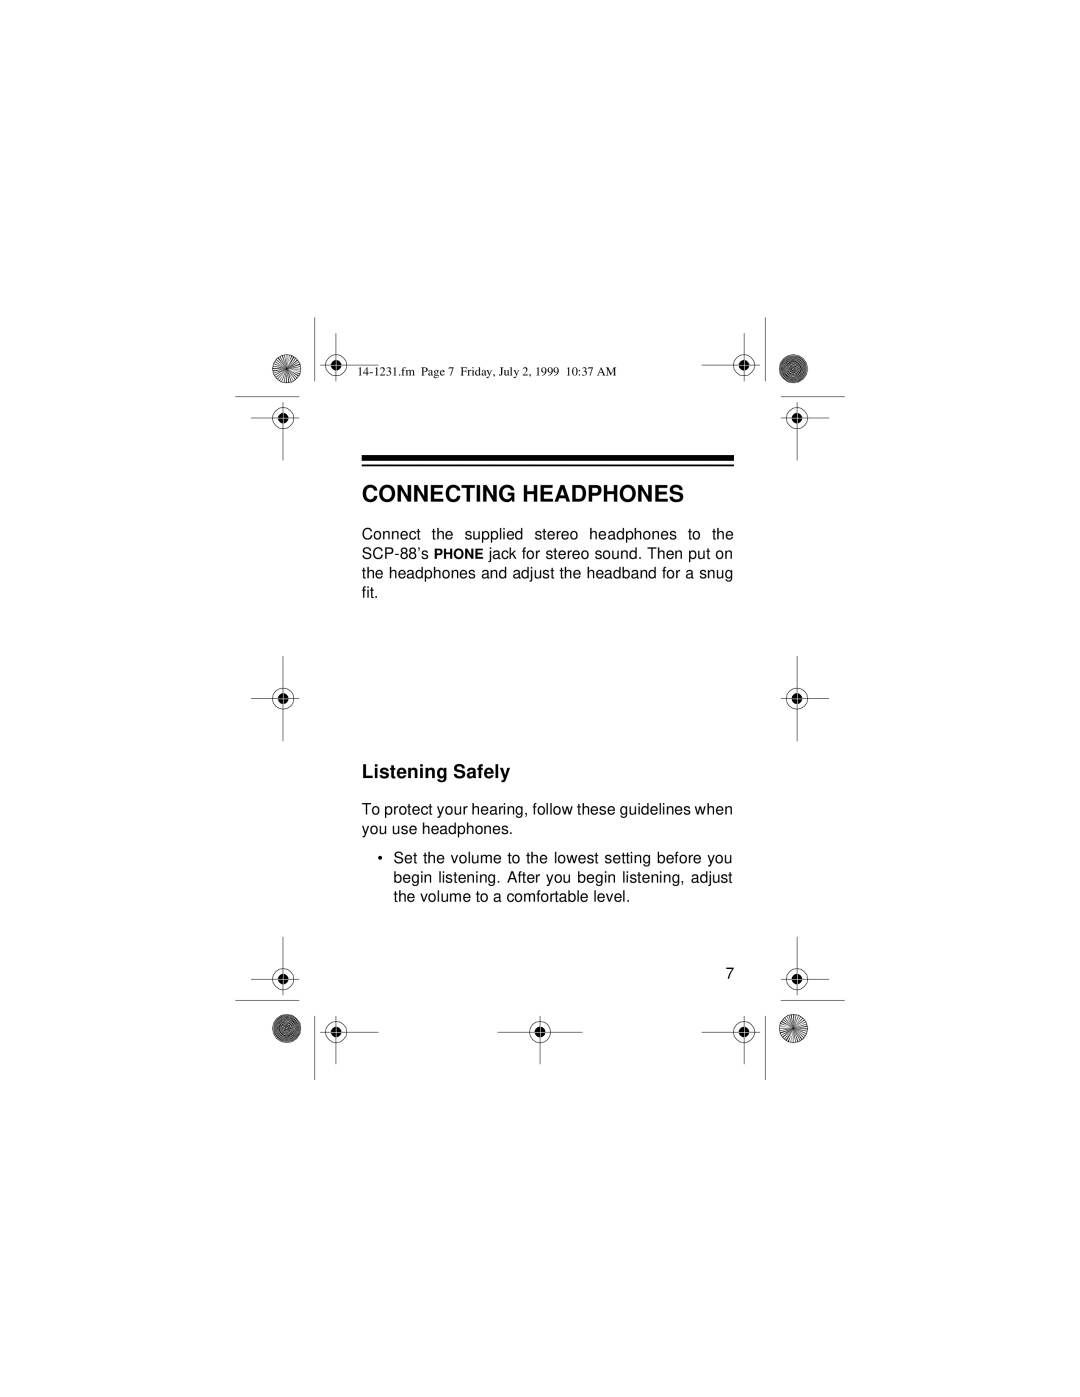 Optimus SCP-88 owner manual Connecting Headphones, Listening Safely 